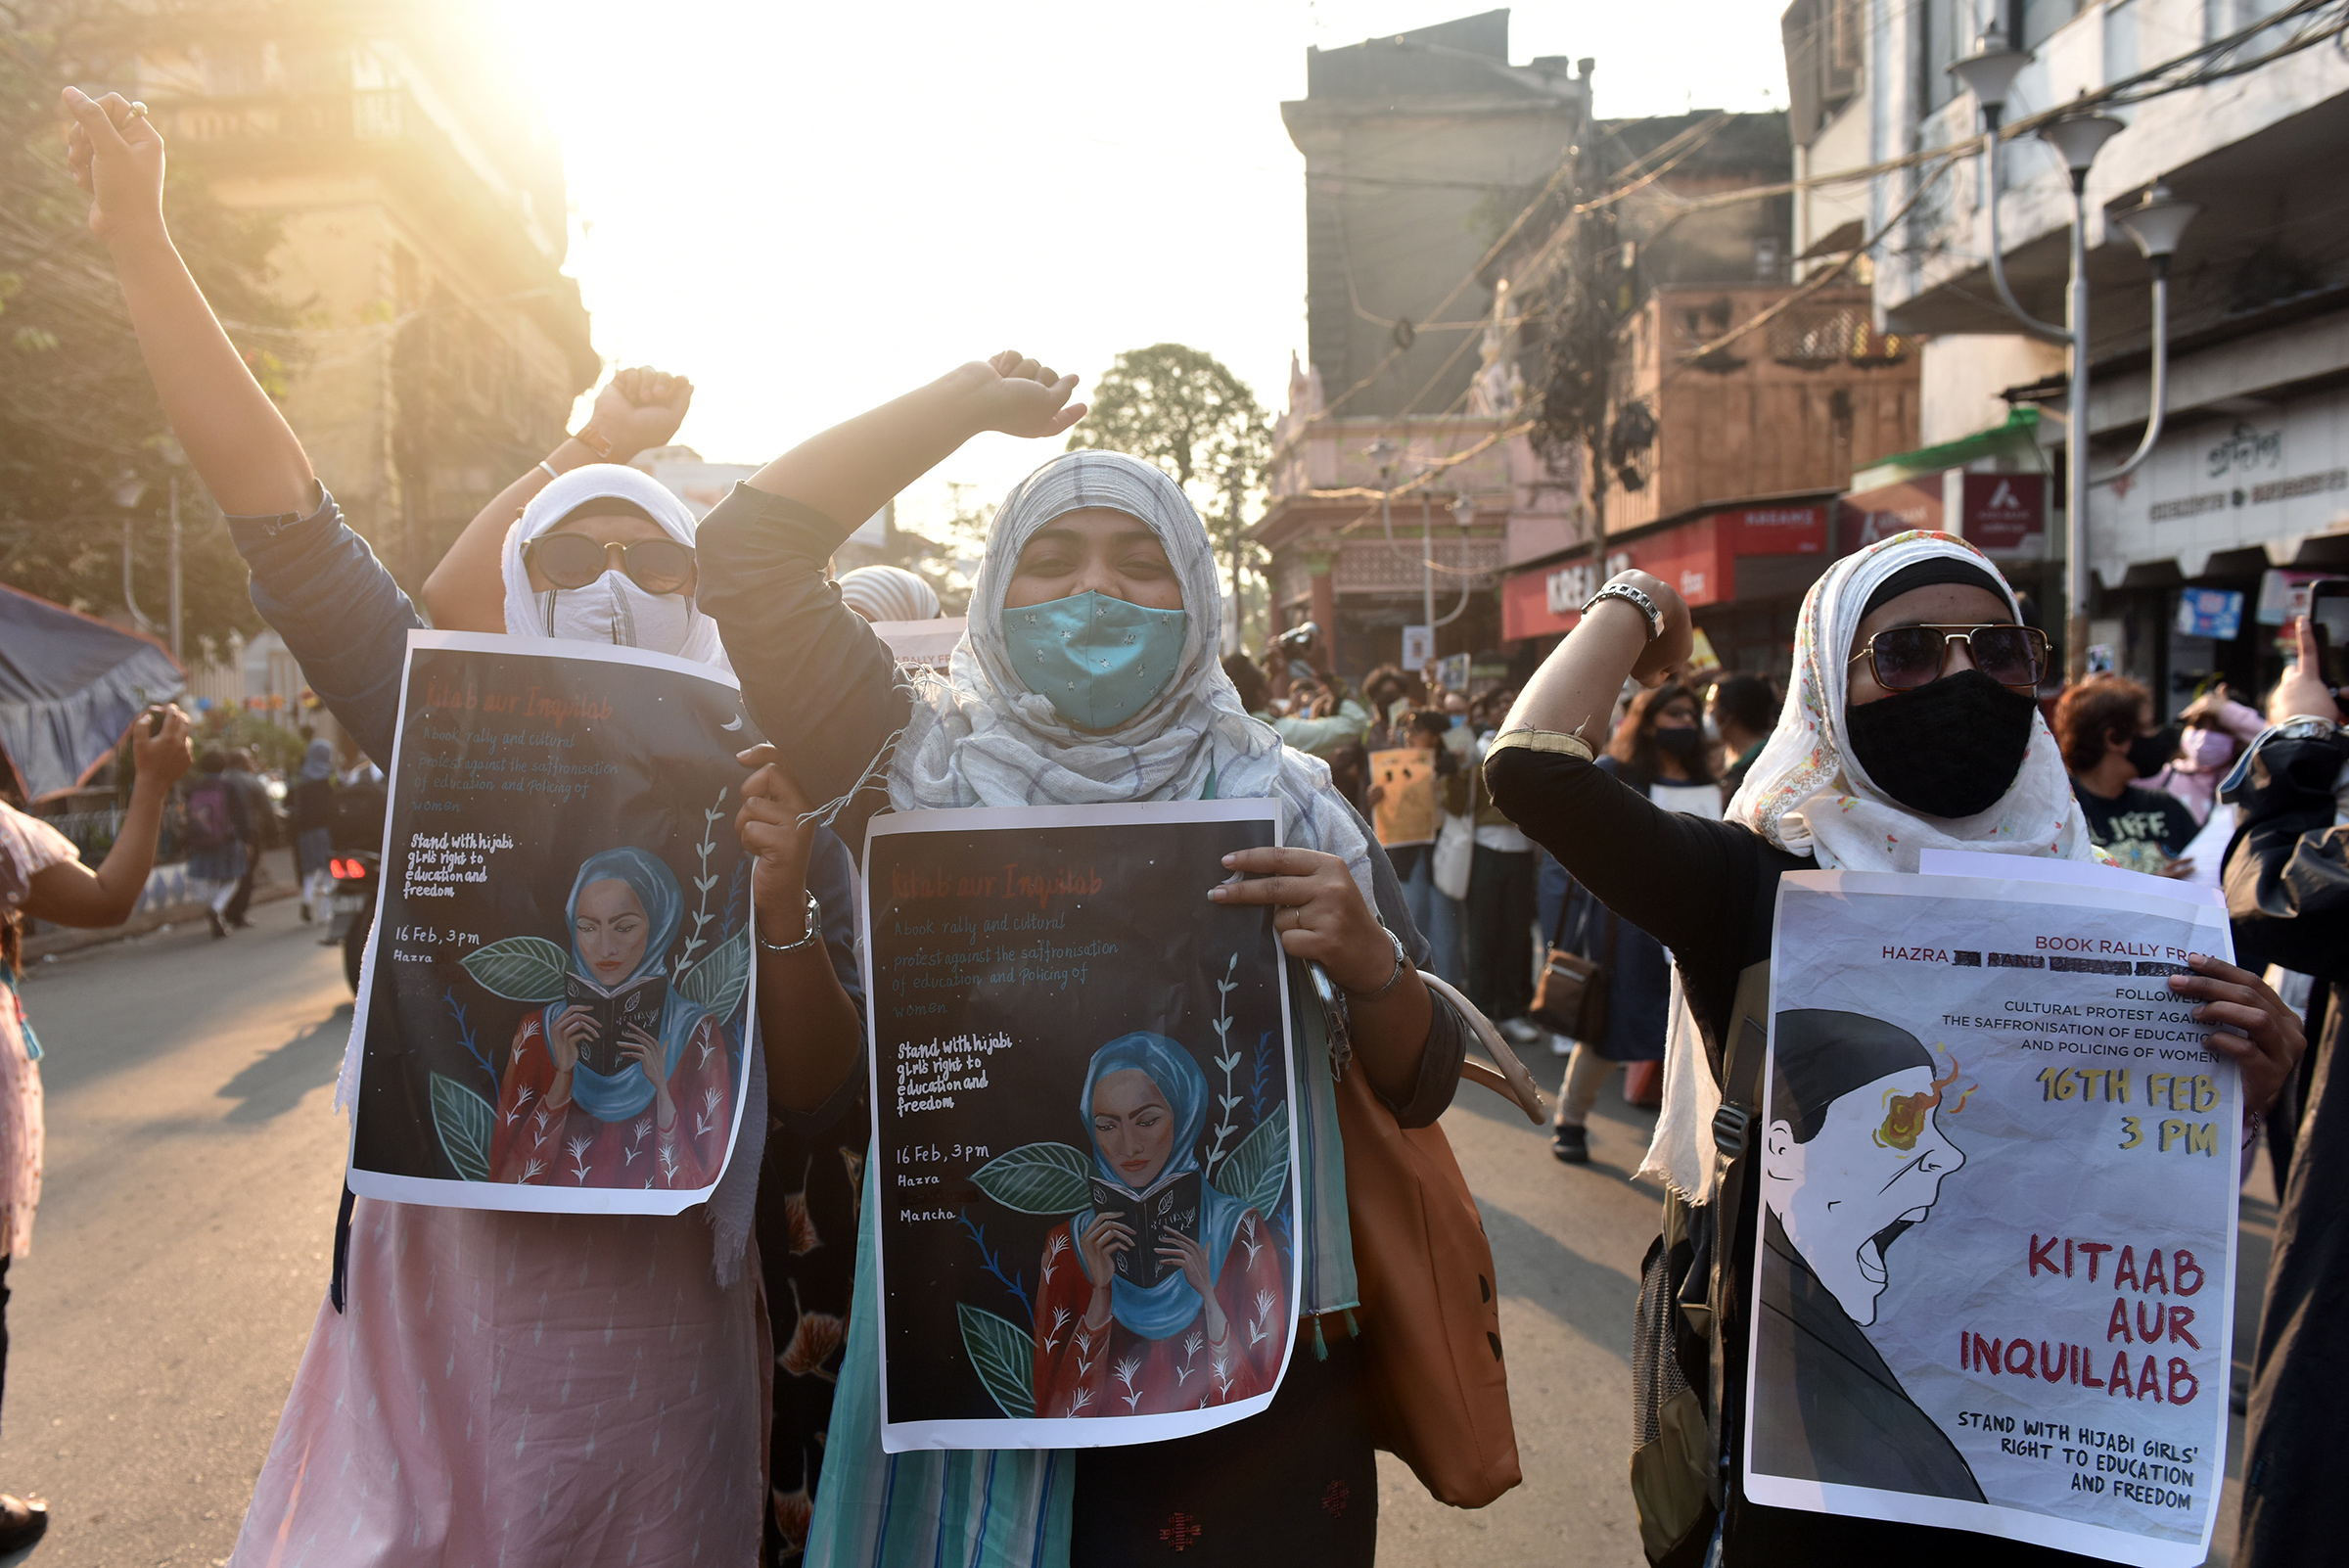 Women in Kolkata protest against the hijab ban in schools on Feb. 16 (Sukhomoy Sen—Eyepix Group/ Future Publishing/Getty Images)